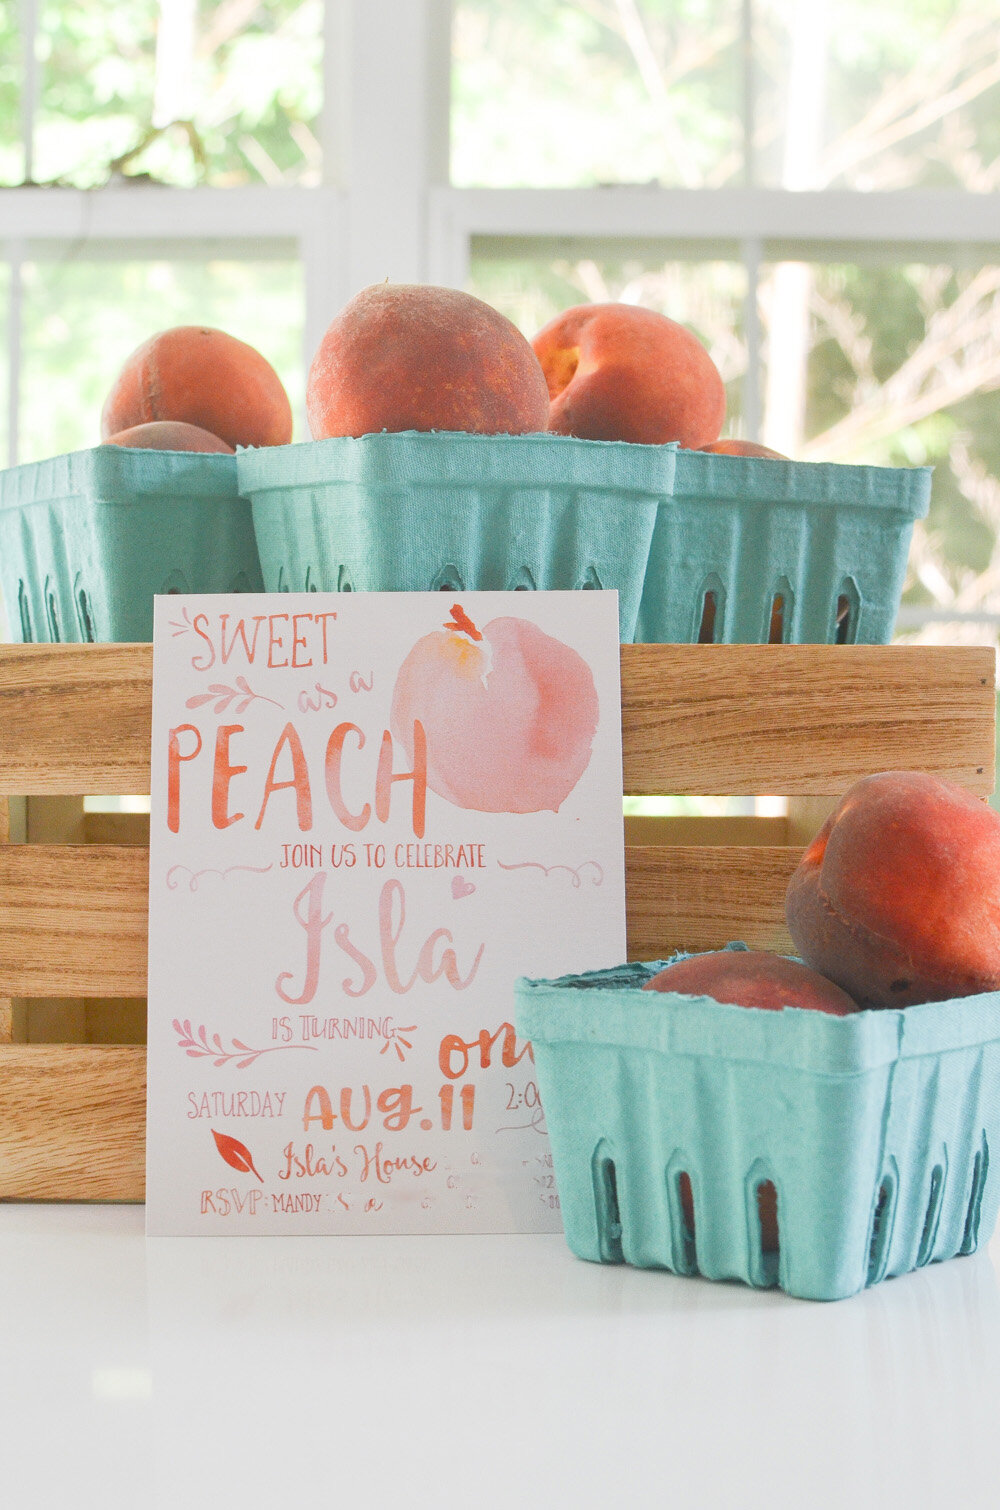 A Southern Peach Party for Isla's 1st Birthday — Momma Society